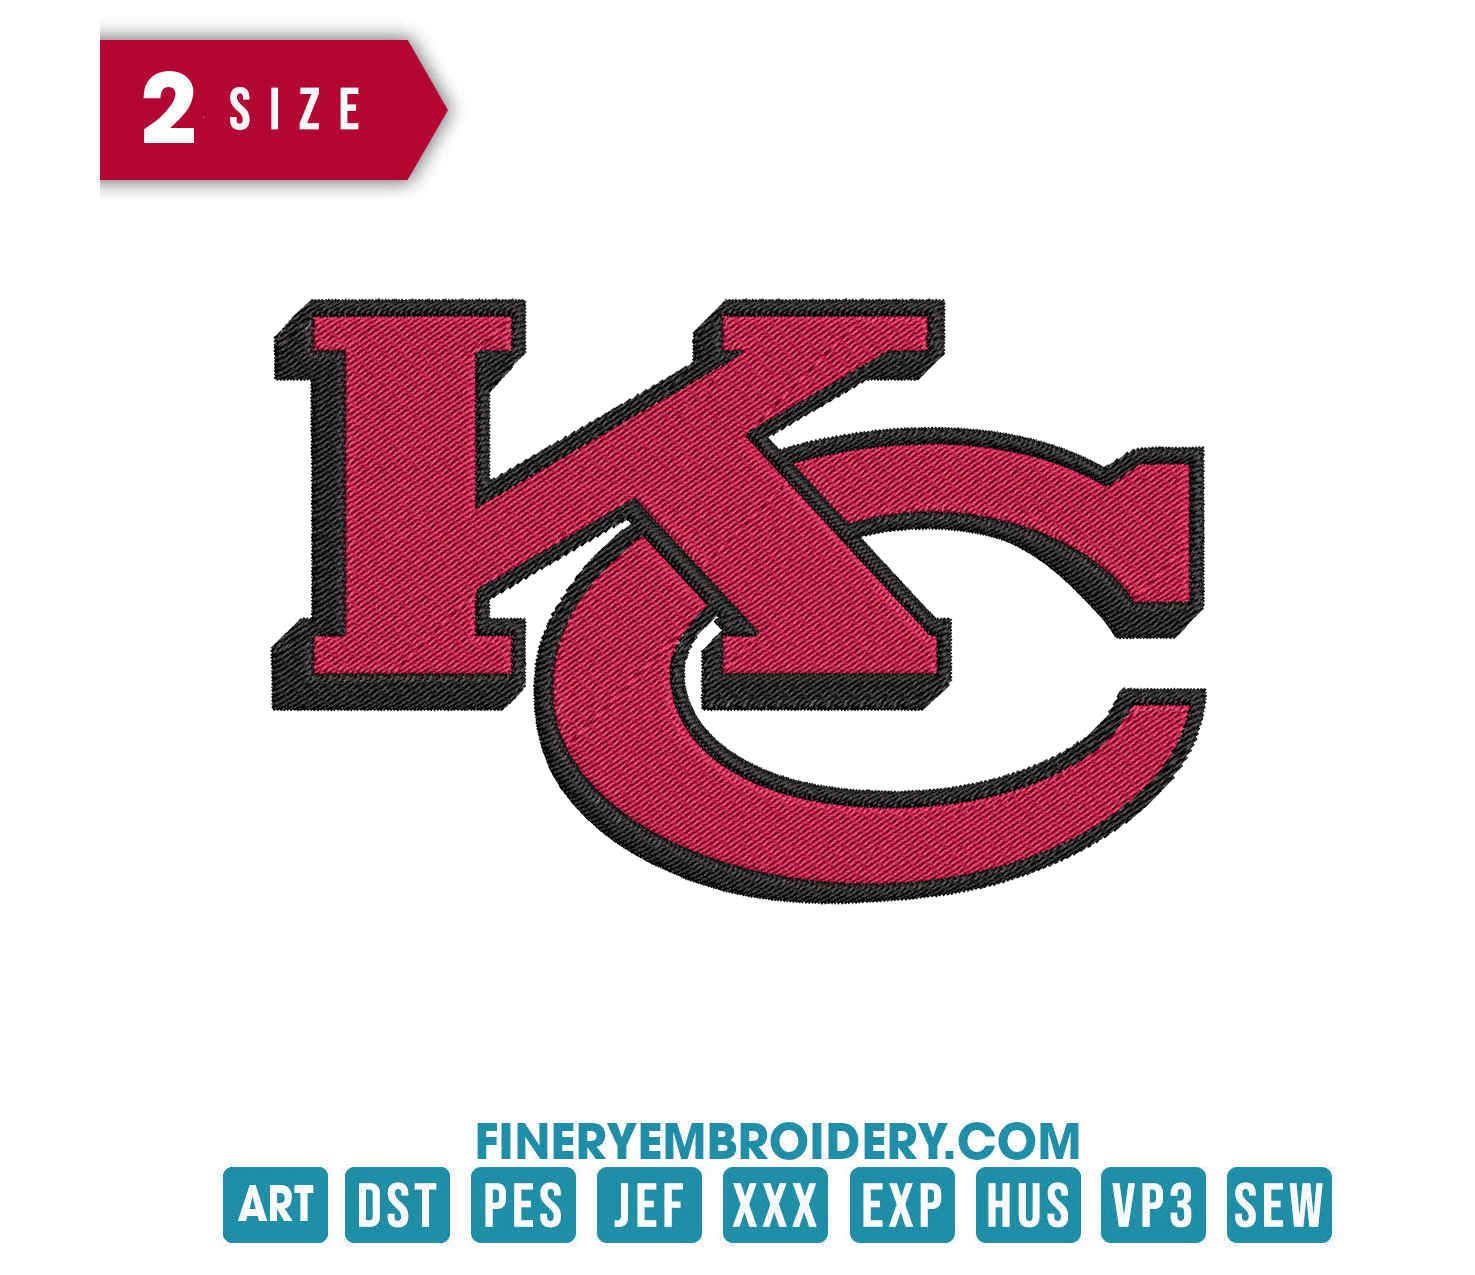 Kansas City Chiefs 4 : Embroidery Design - FineryEmbroidery